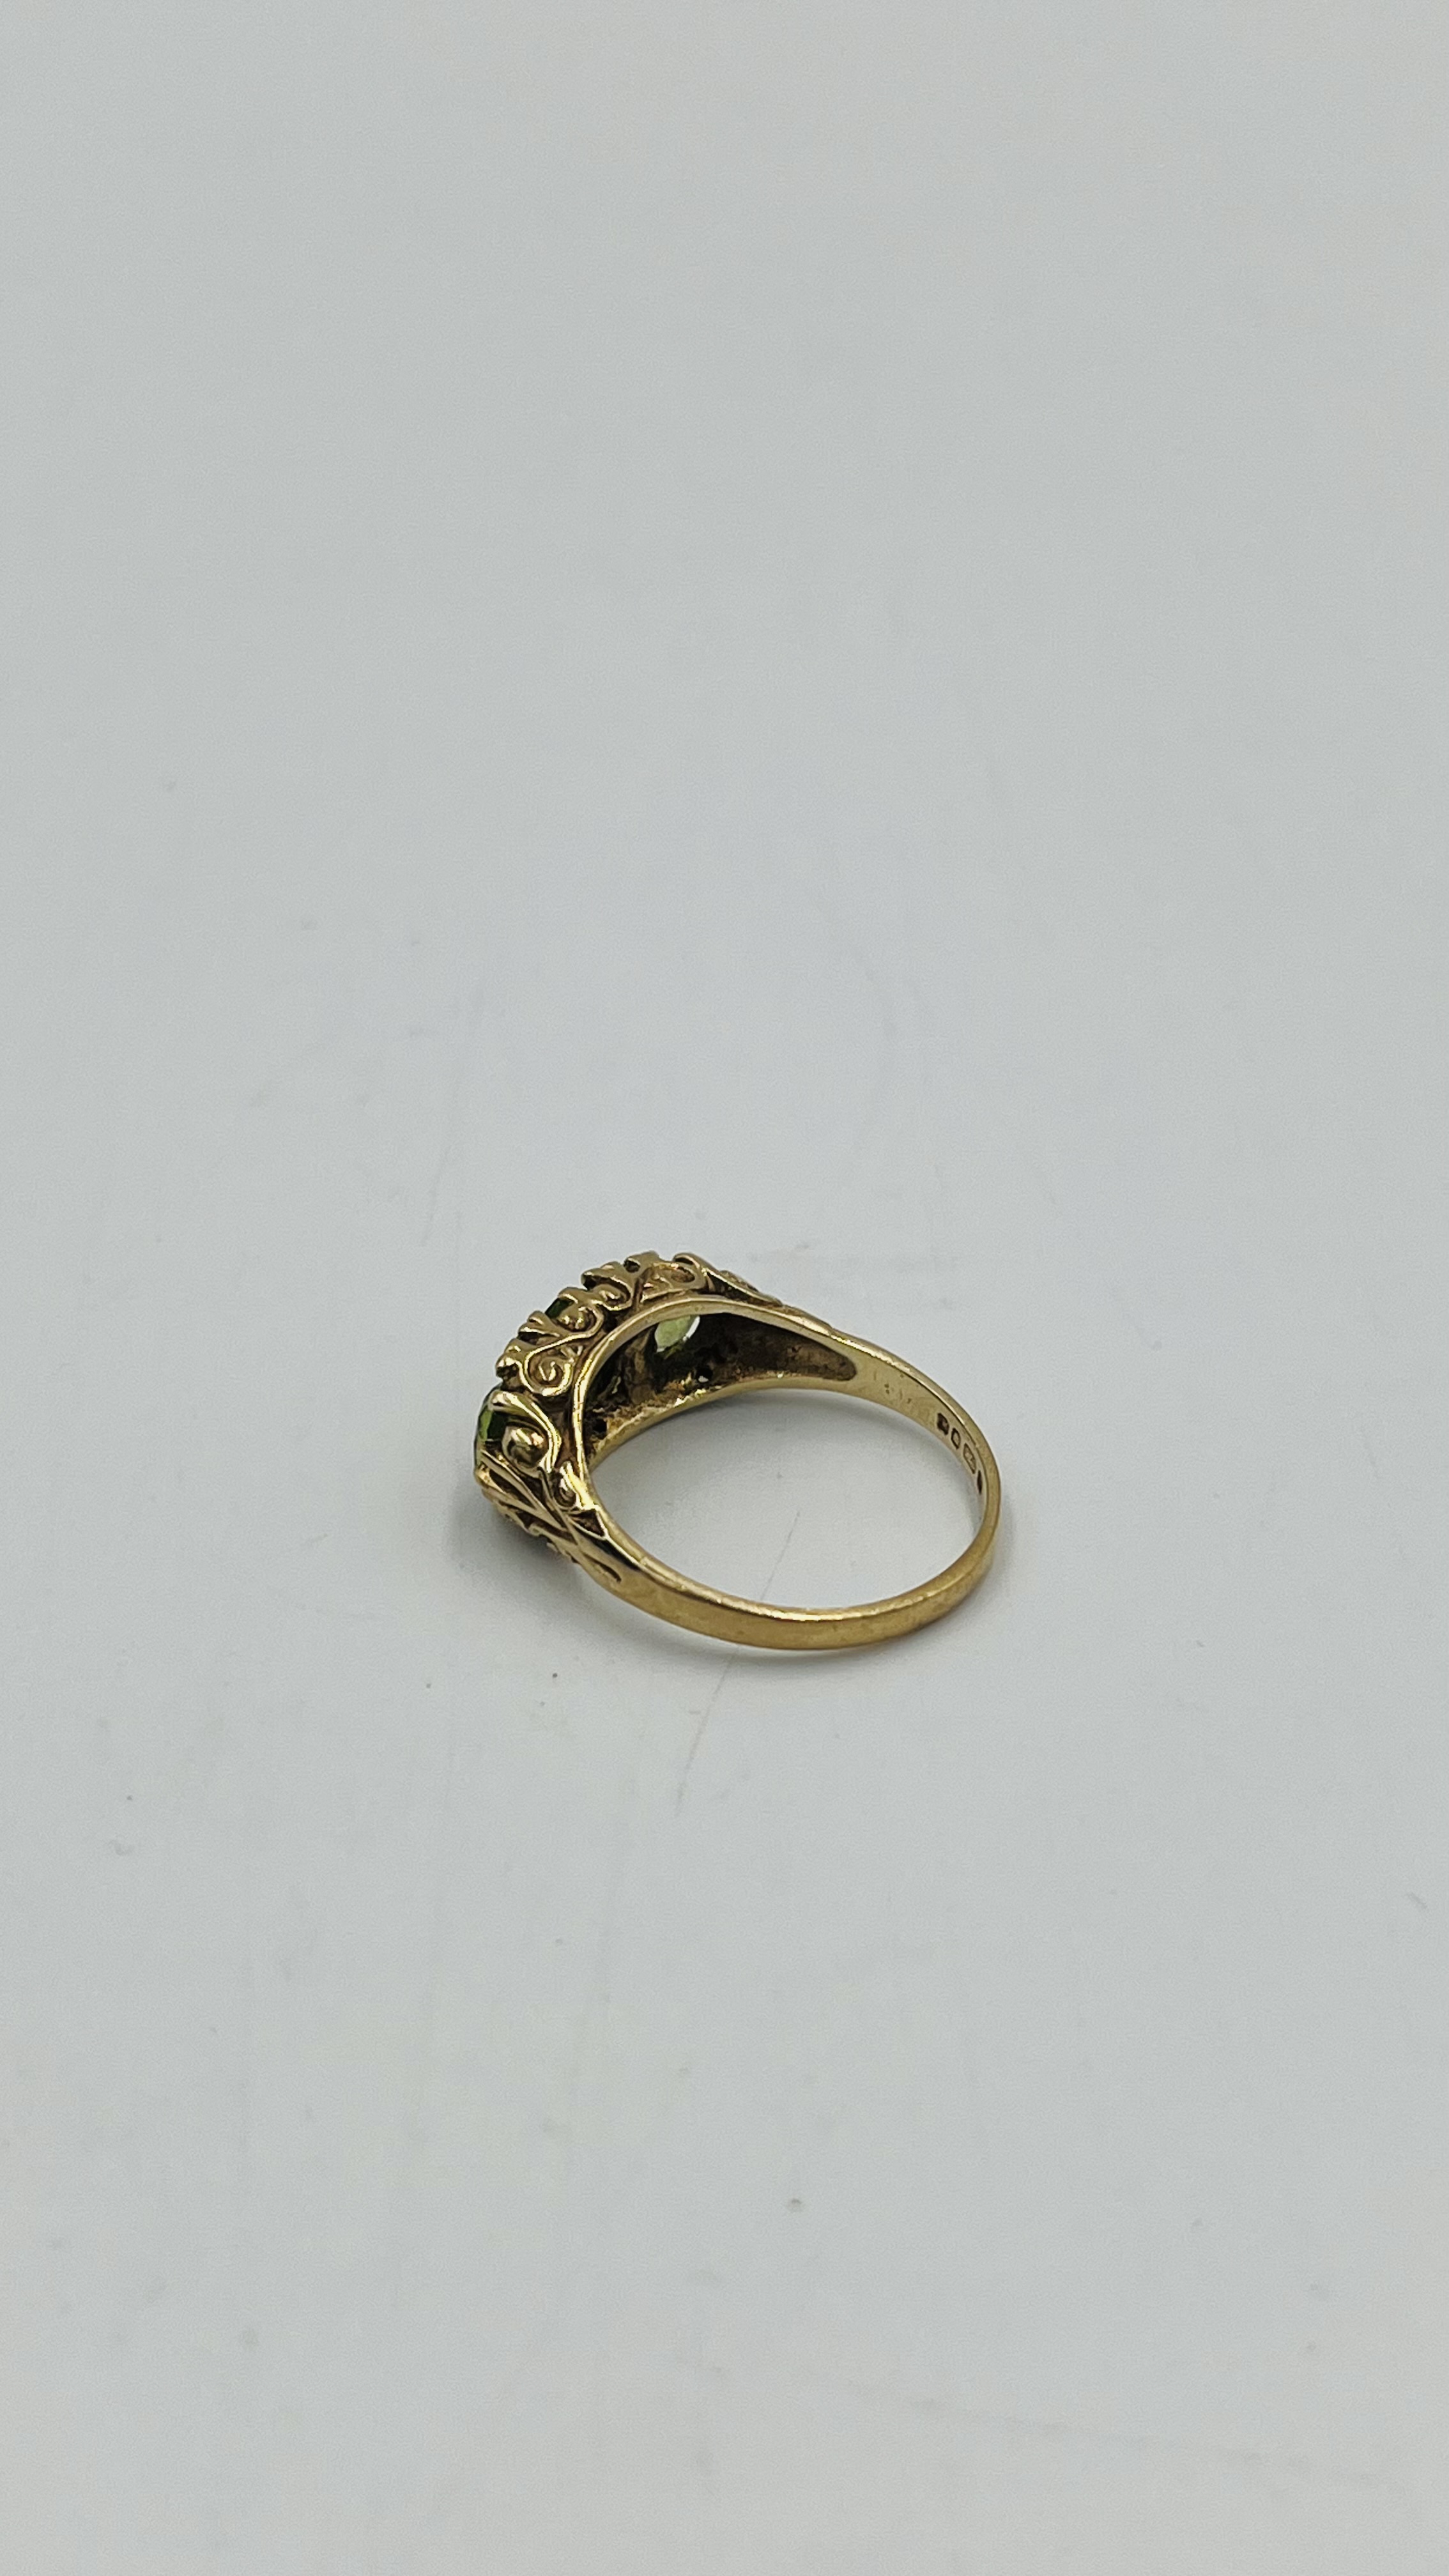 9ct gold ring set with a green stone - Image 2 of 4